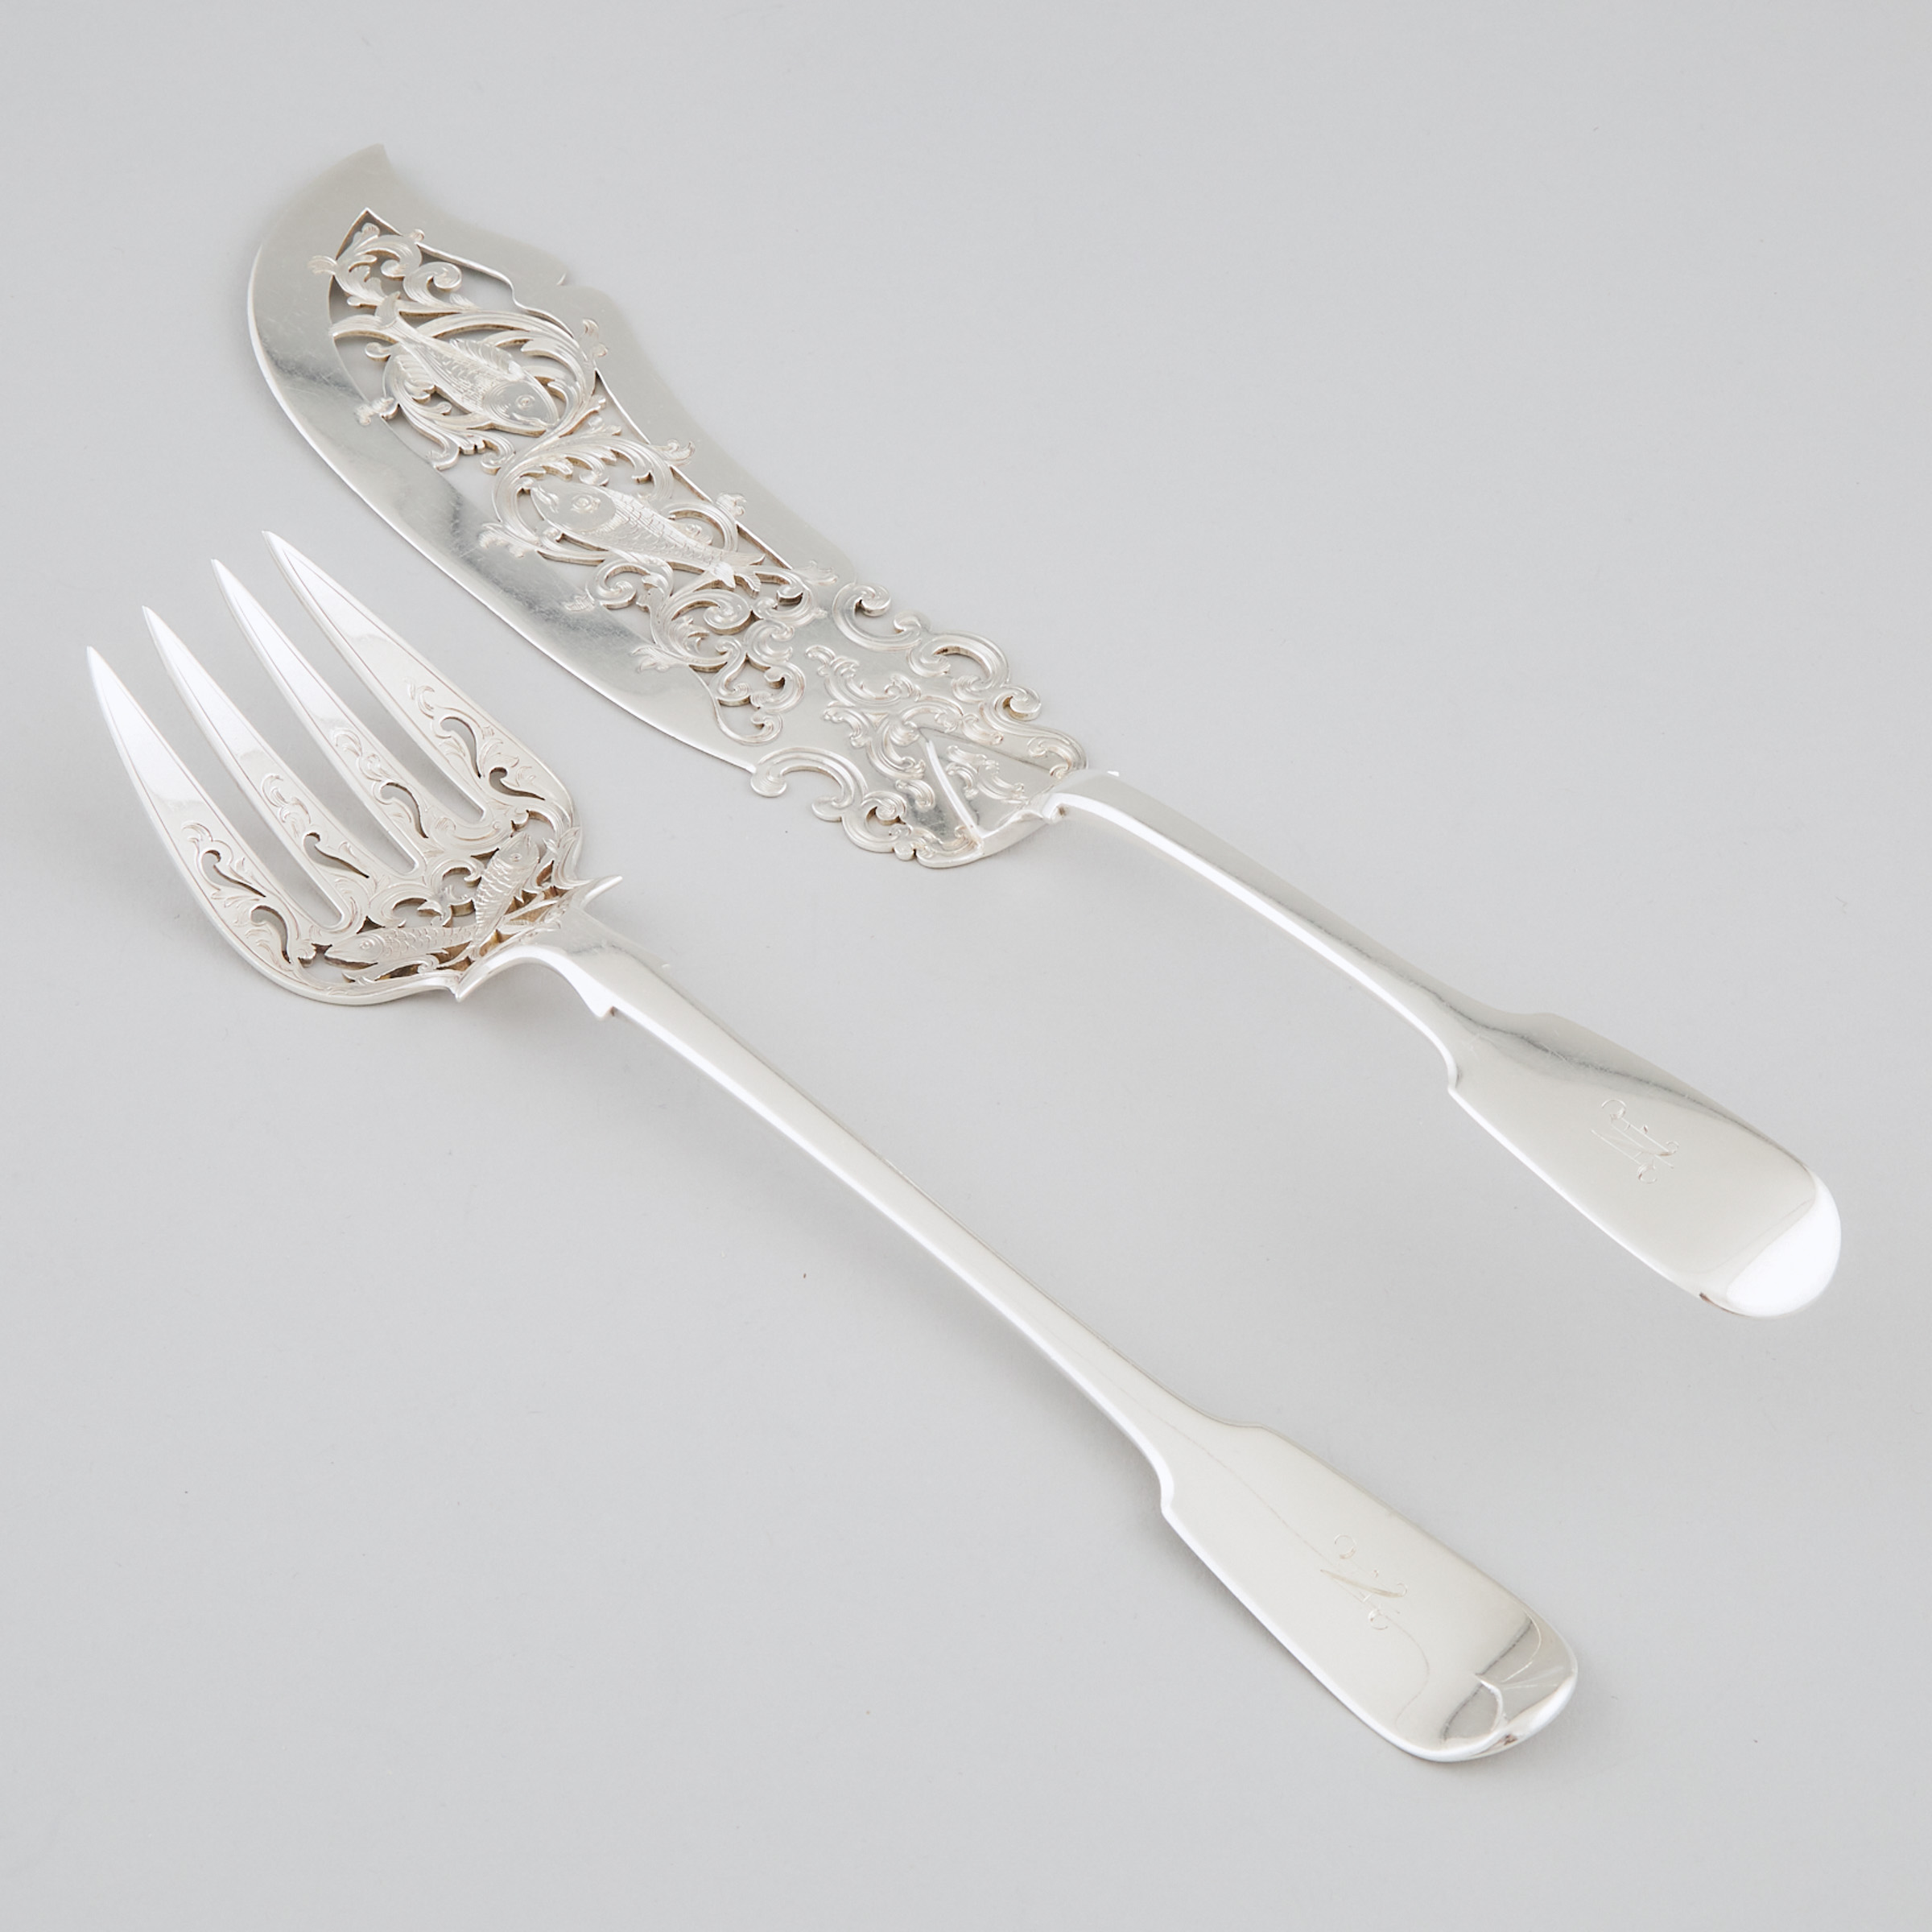 Pair of Victorian Silver Fiddle Pattern Fish Servers, William Robert Smily, London, 1850